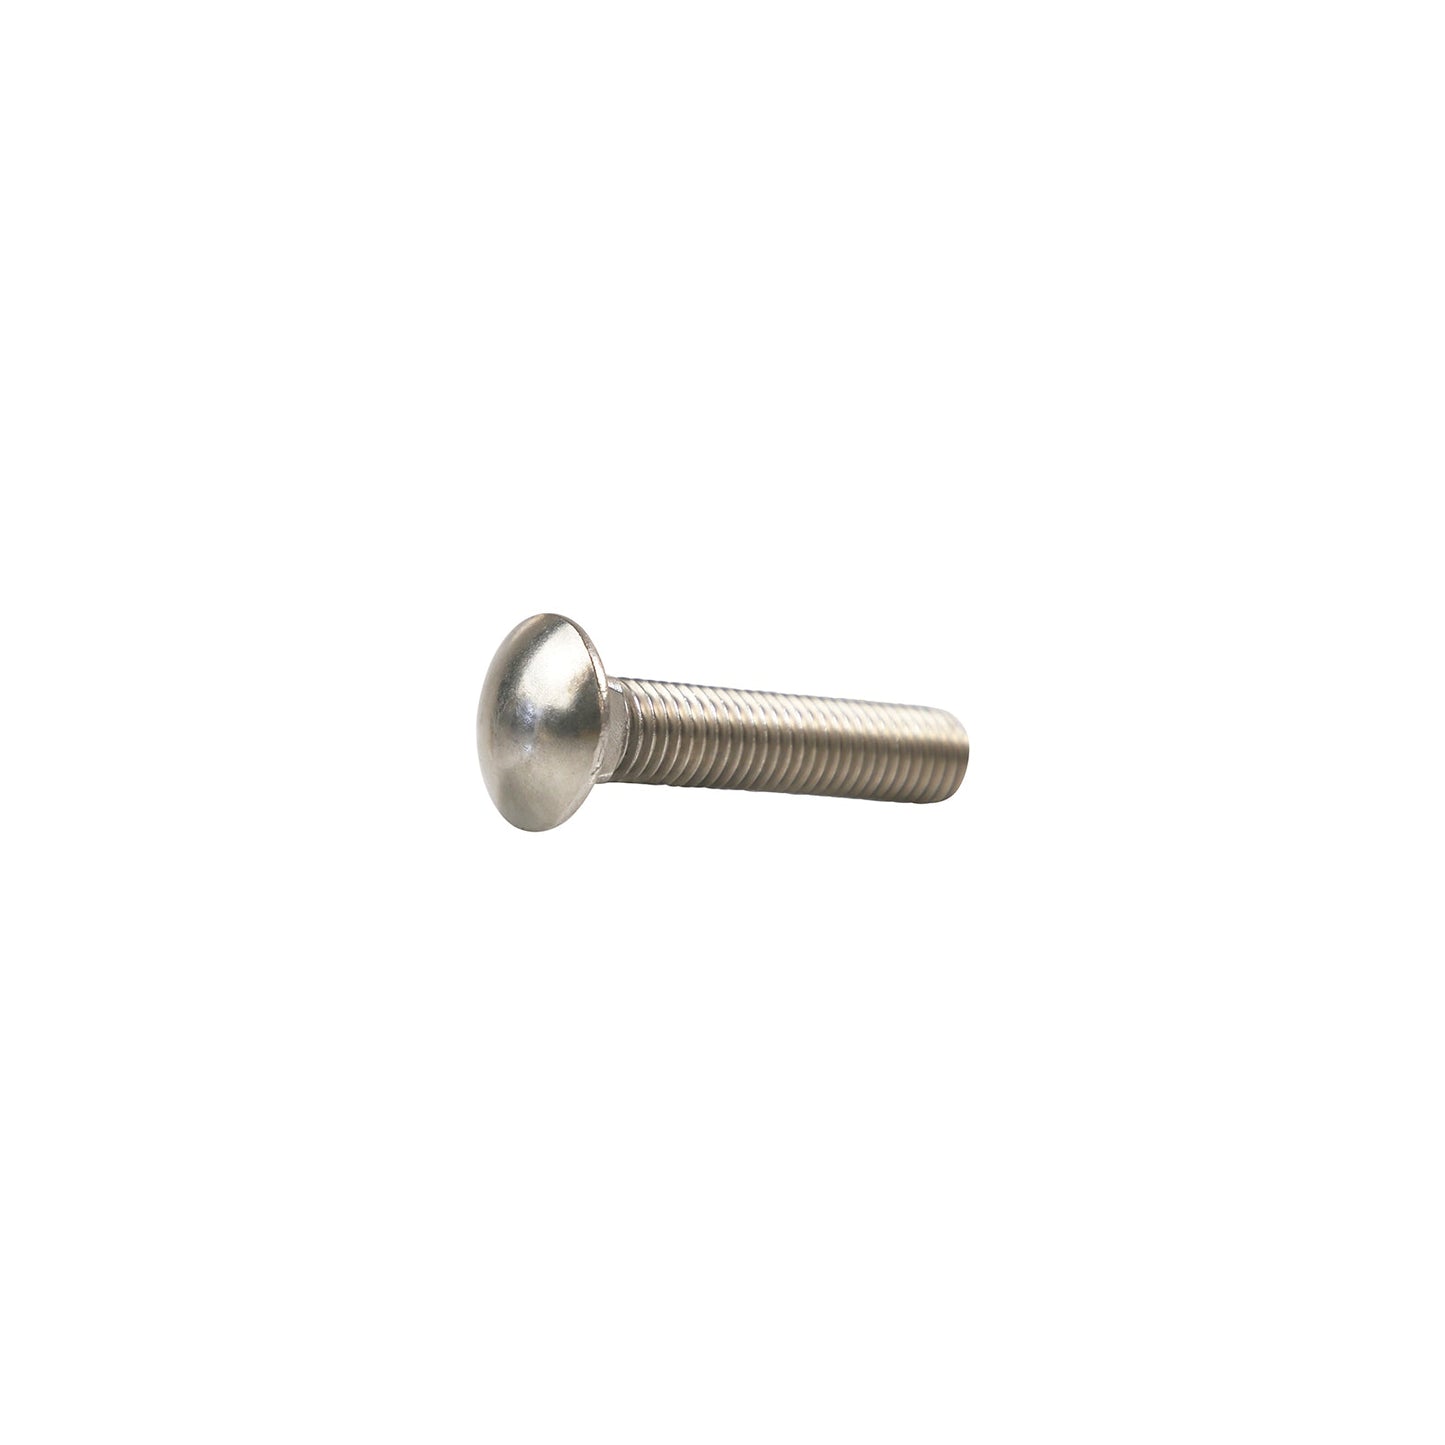 5/8"-11 x 3" Conquest Carriage Bolt - 304 Stainless Steel